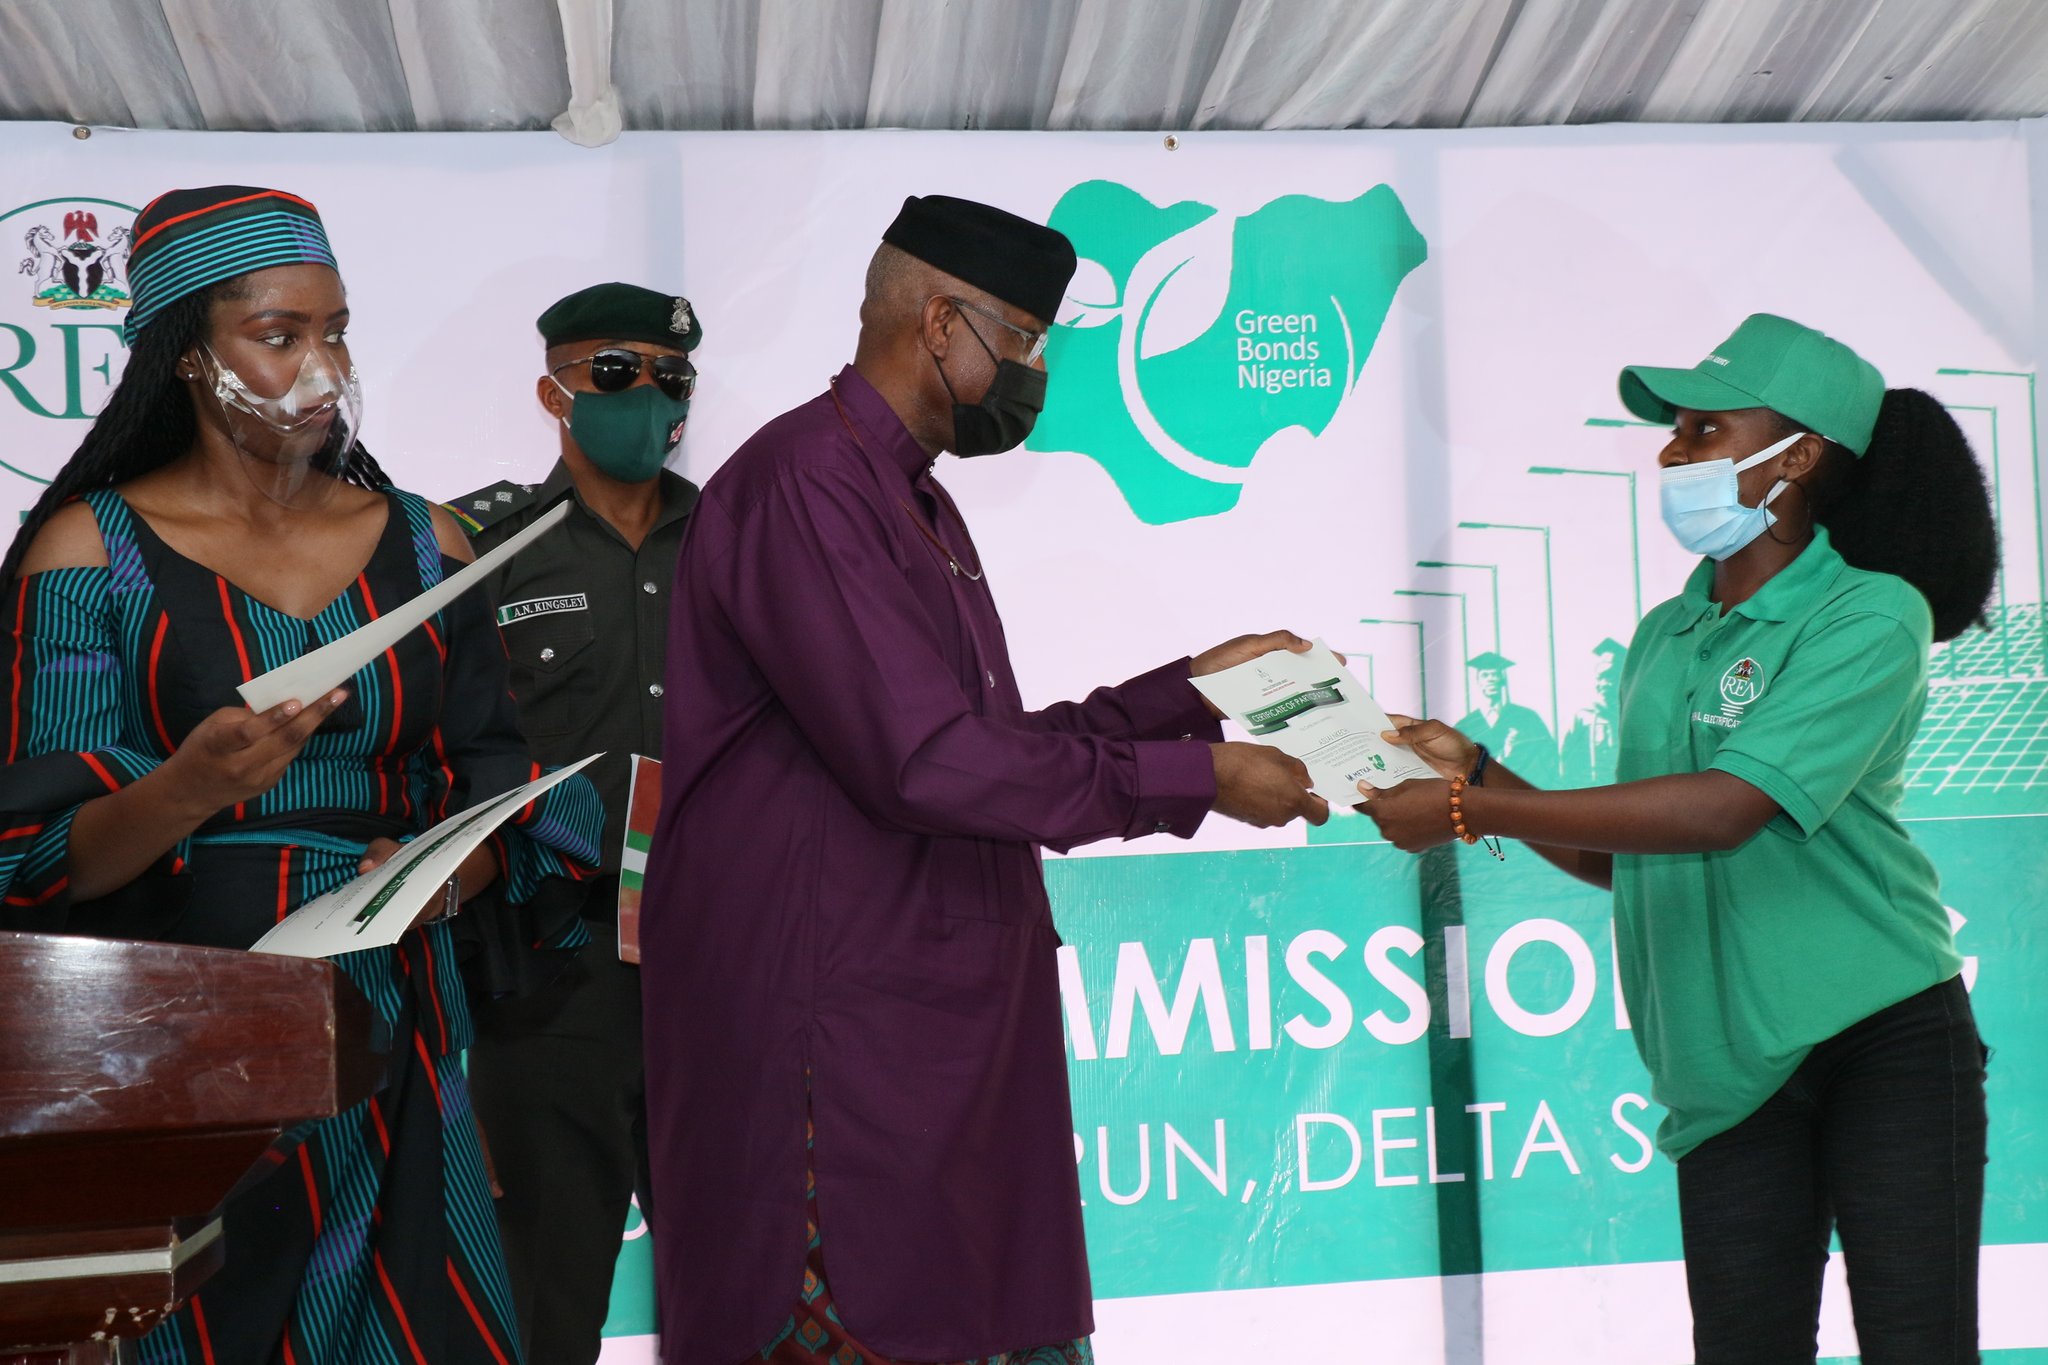 Commissioning of the 1.35MW Solar Hybrid Project at the Federal University of Petroleum, Effurun